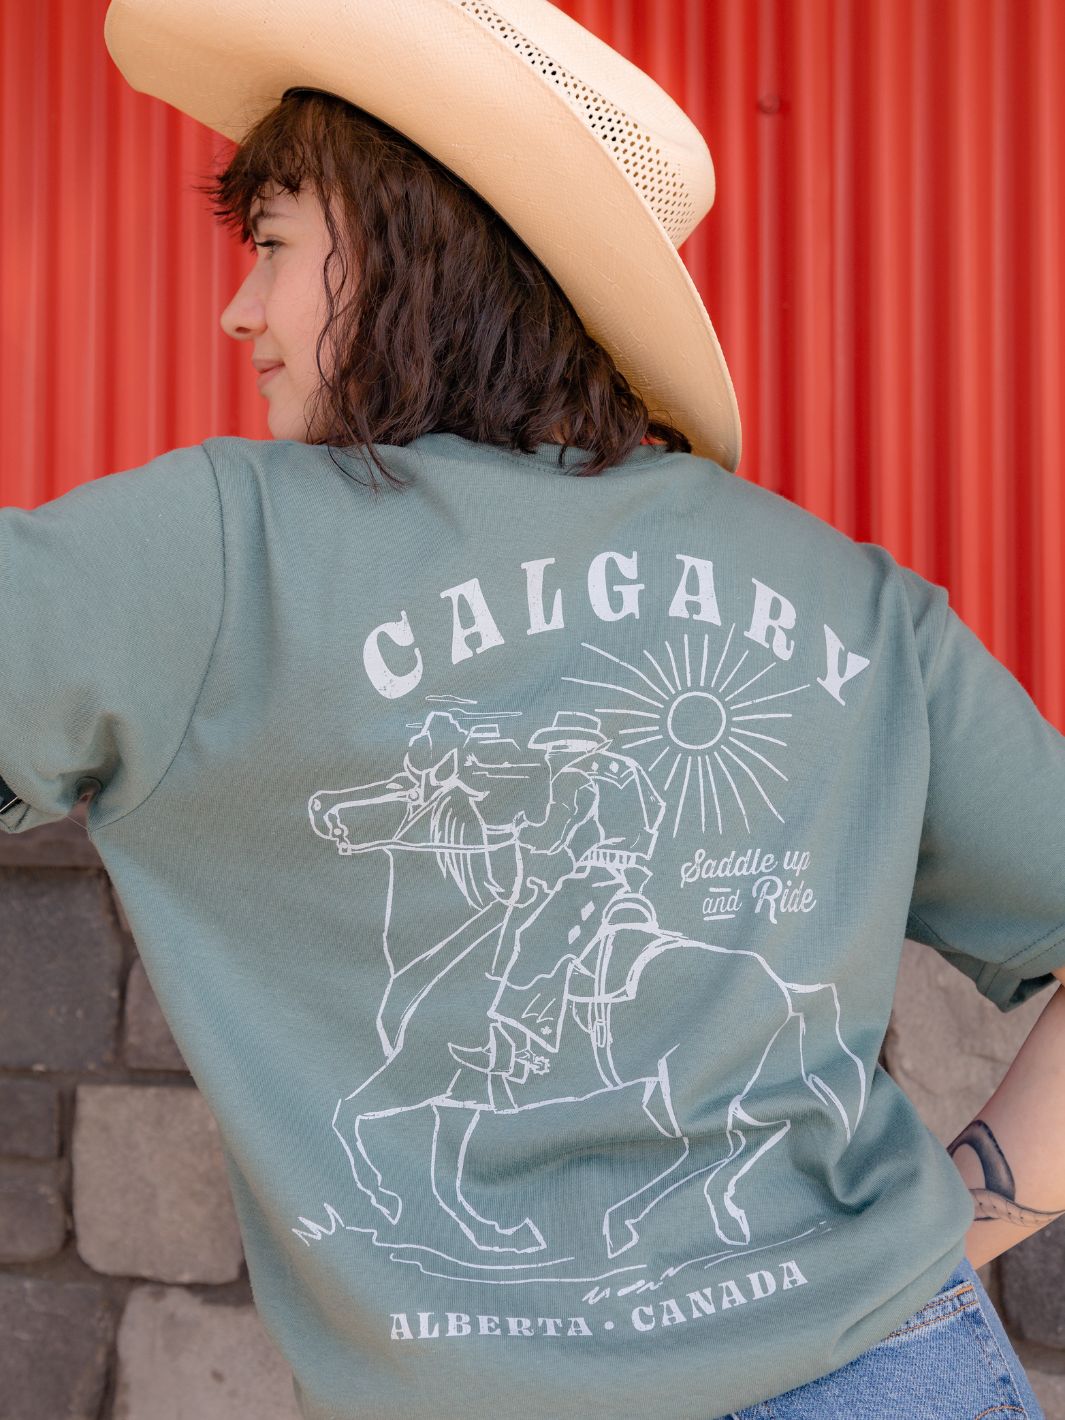 Individual showcasing the Local Laundry Saddle Up and Ride shirt in Sage green featuring the back graphic of a cowboy riding a horse with 